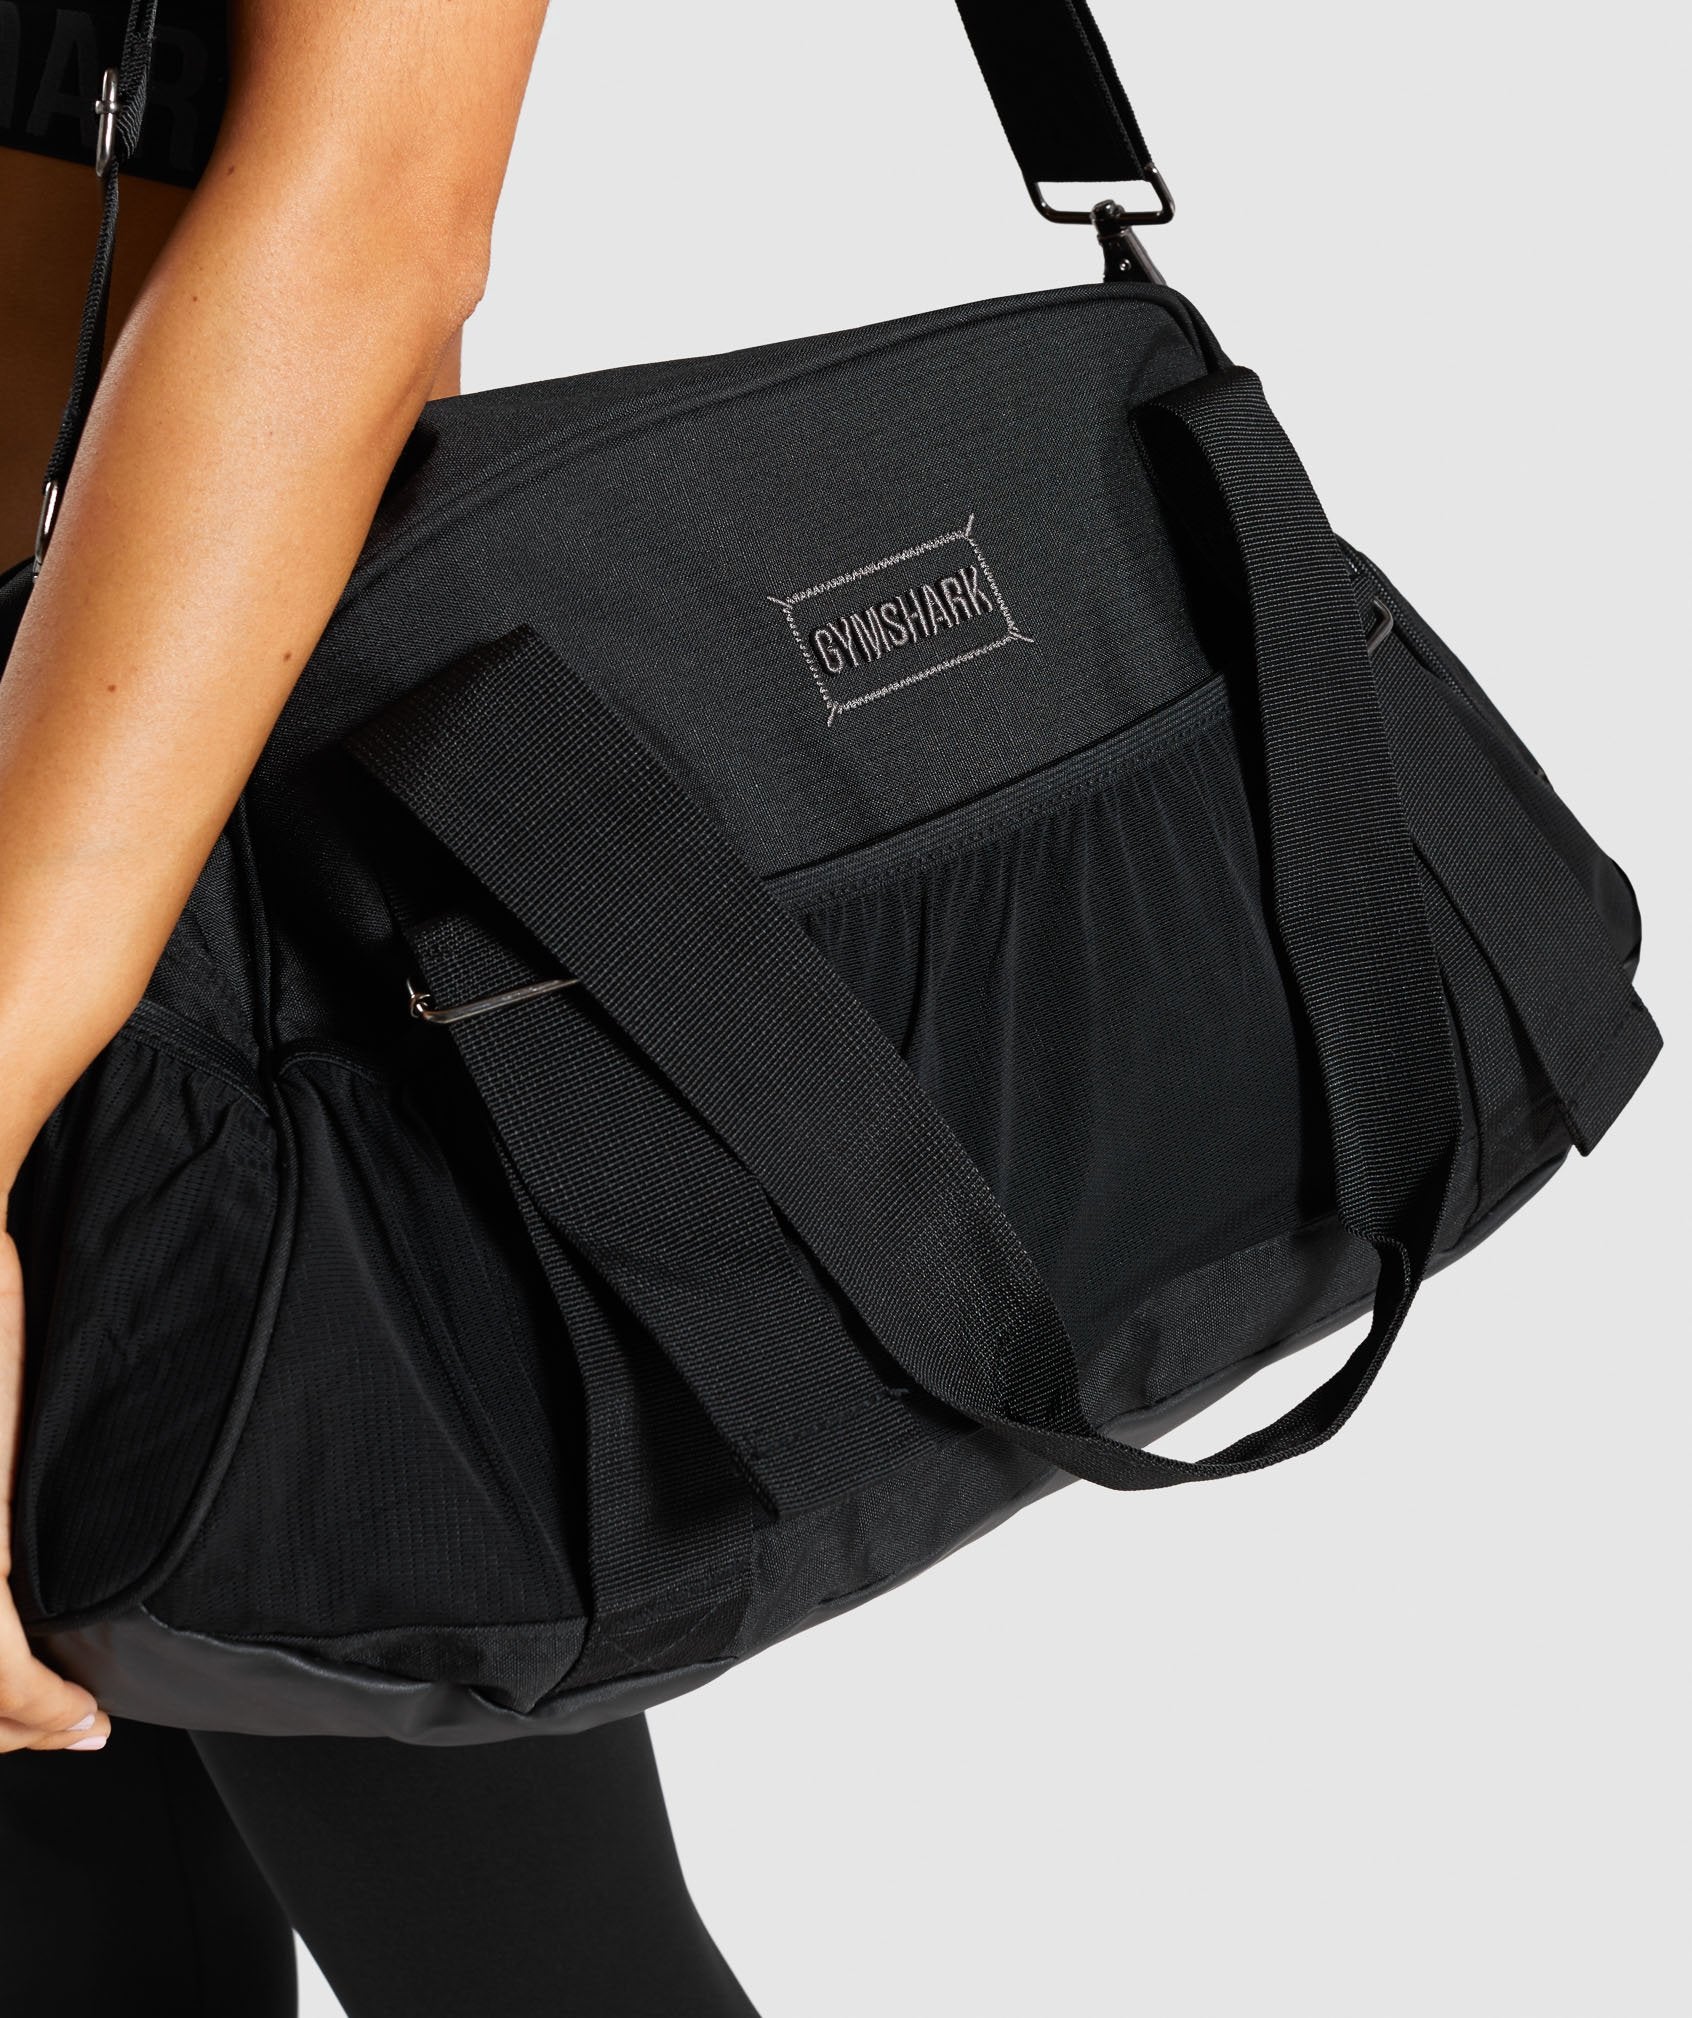 Lifestyle Gym Bag in Black - view 8